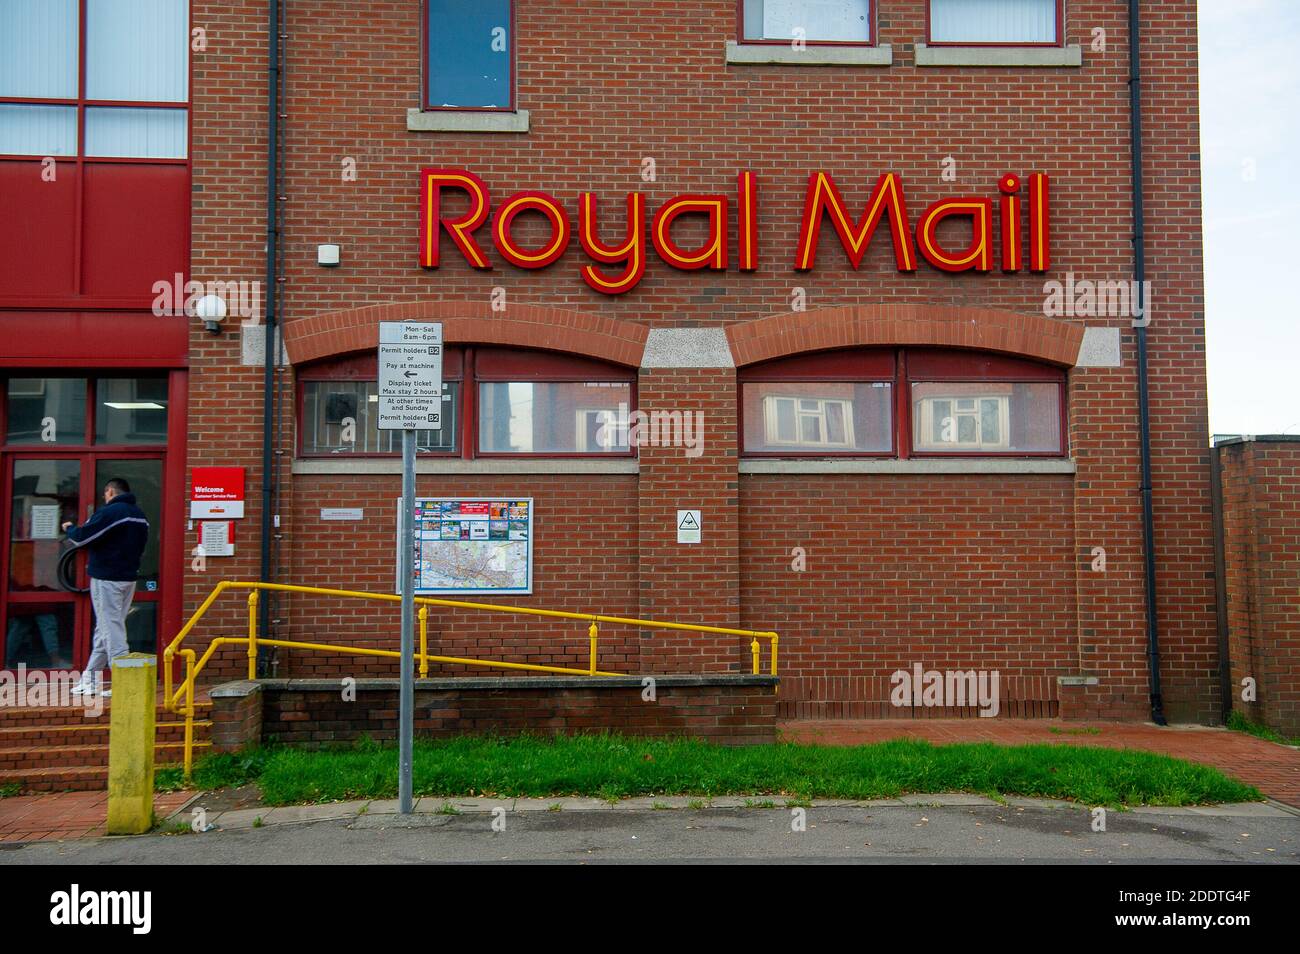 Slough, Berkshire, UK. 26th November, 2020. A report by Ofcom has found that if the Royal Mail did deliveries on only weekdays and not Saturdays, that they could save up to £225m. The number of letters being posted since the Covid-19 Pandemic has dropped as many office workers are now working from home and relying on technology for communication more so than ever. Pictured is the Royal Mail depot in Slough, Berkshire. Credit: Maureen McLean/Alamy Live News Stock Photo